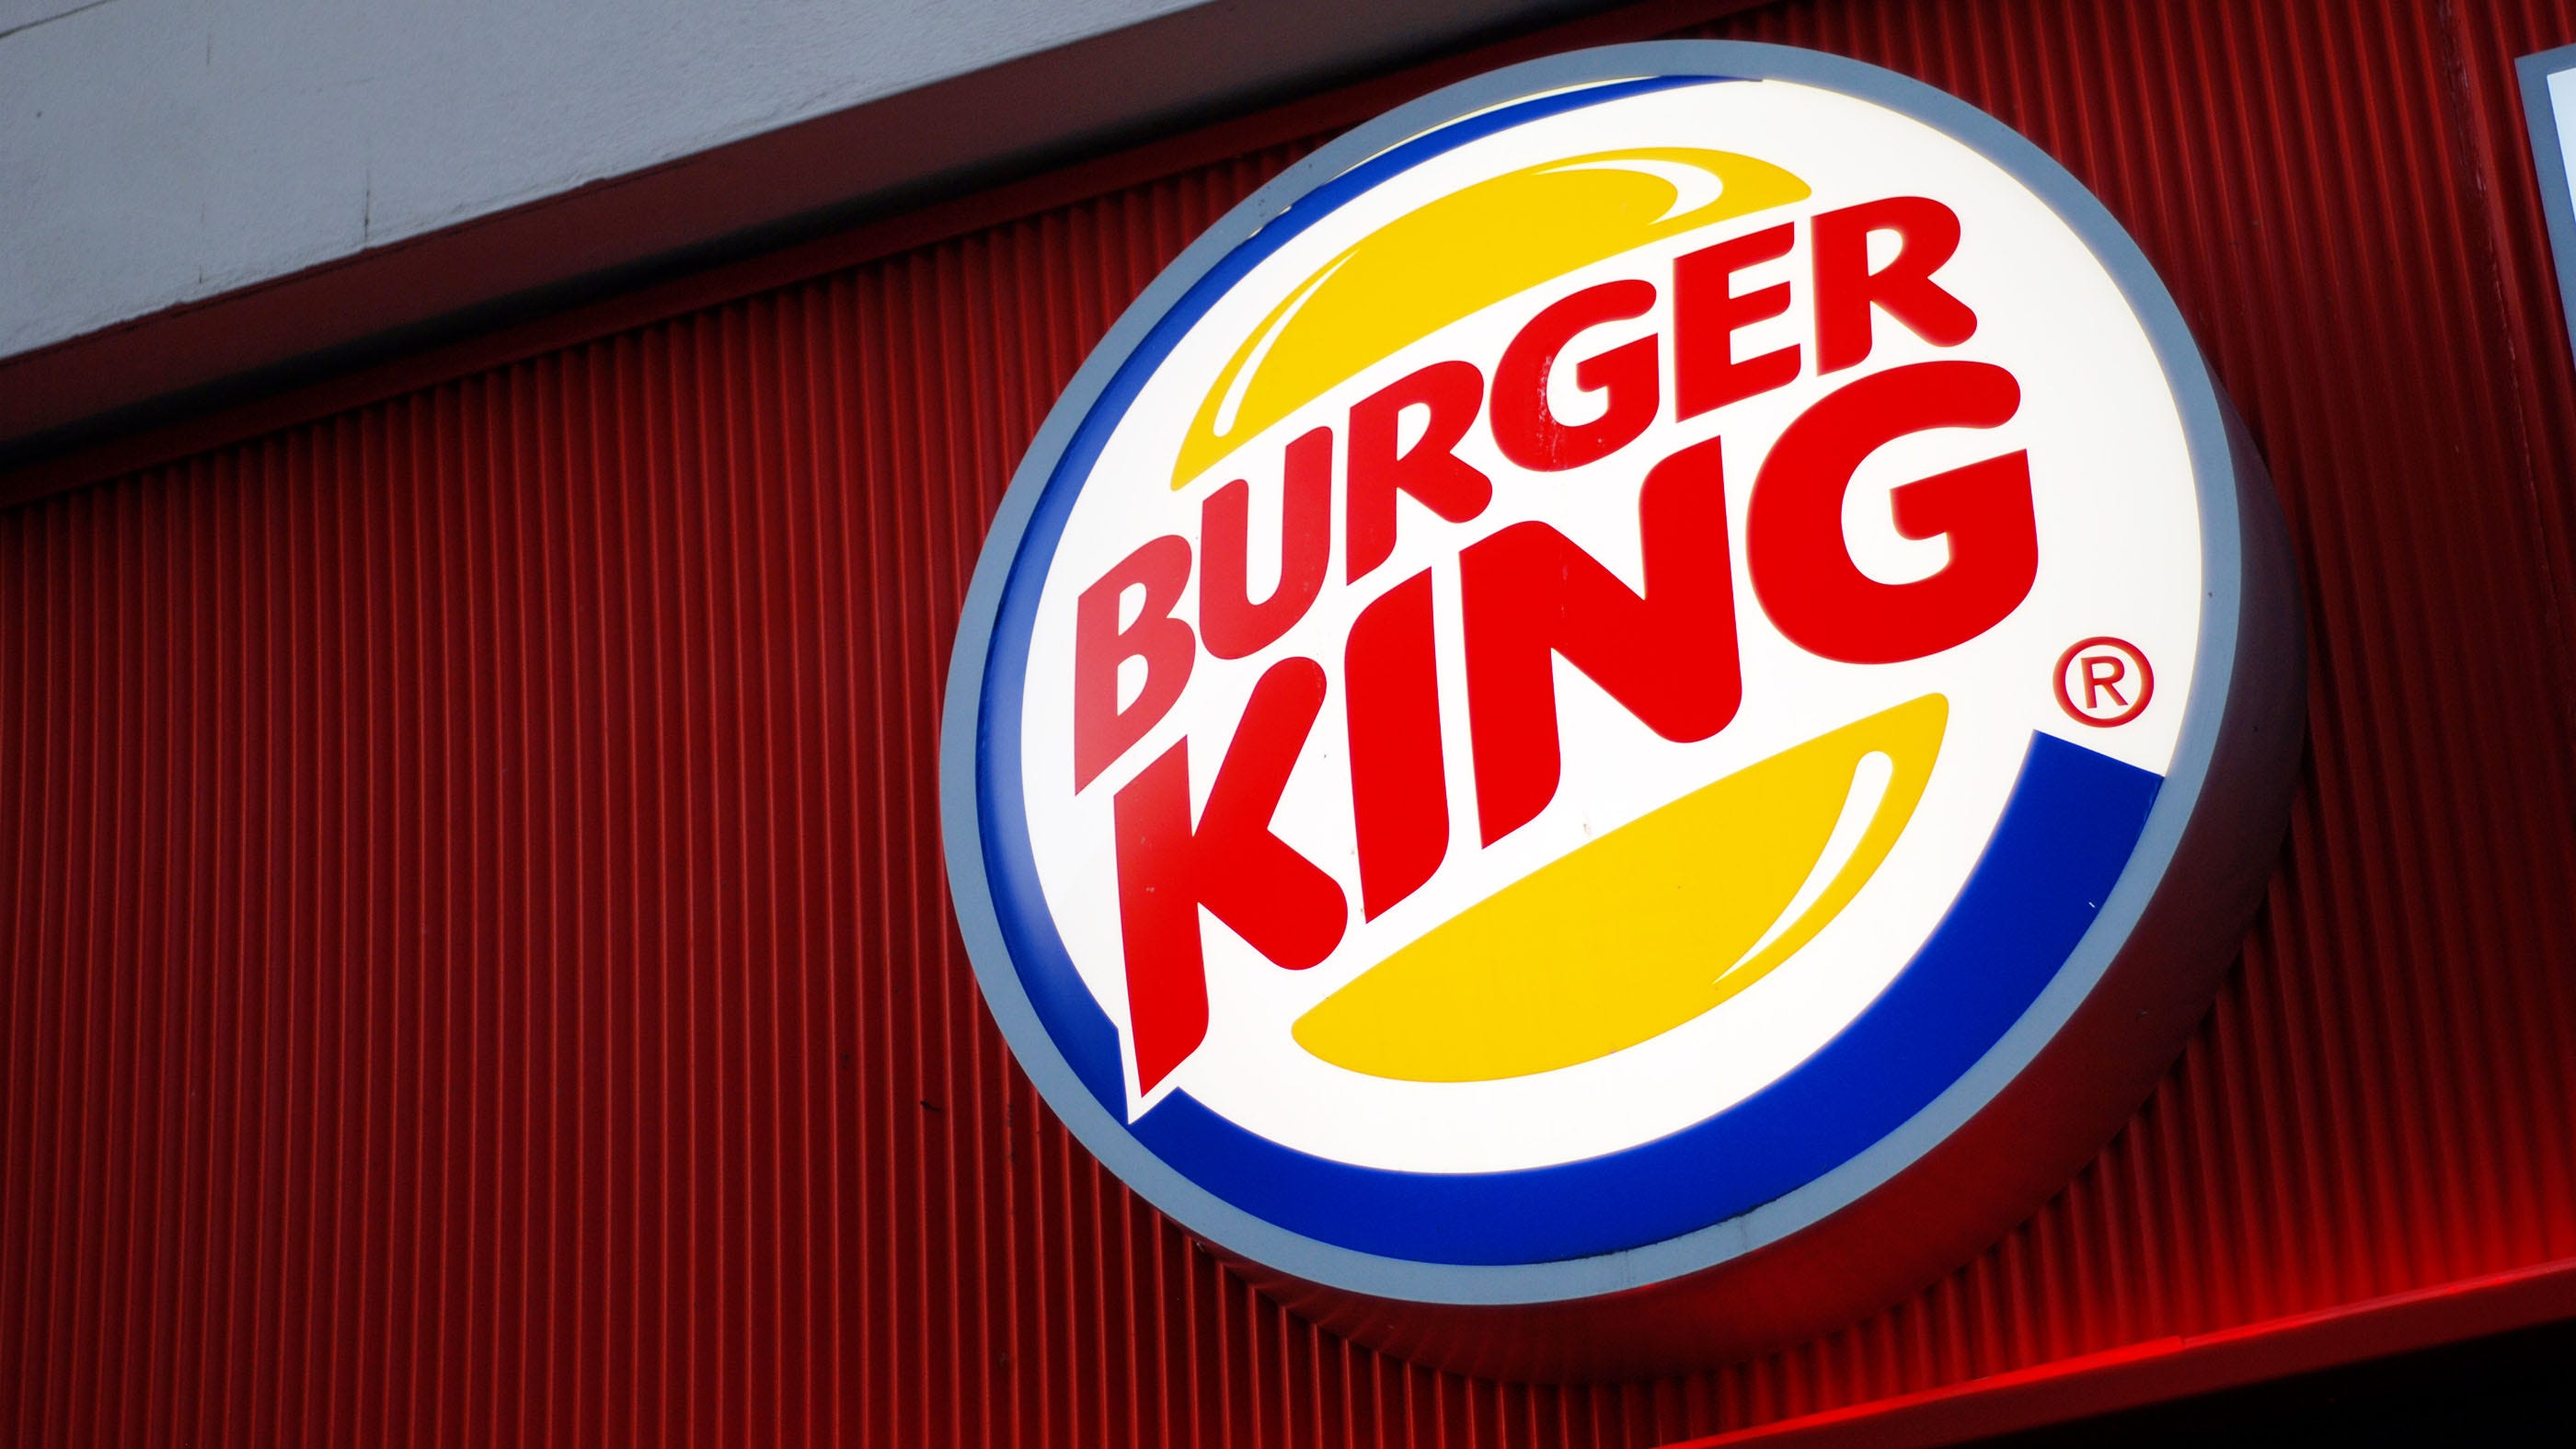 Burger King debuts new logo and packaging for 2021